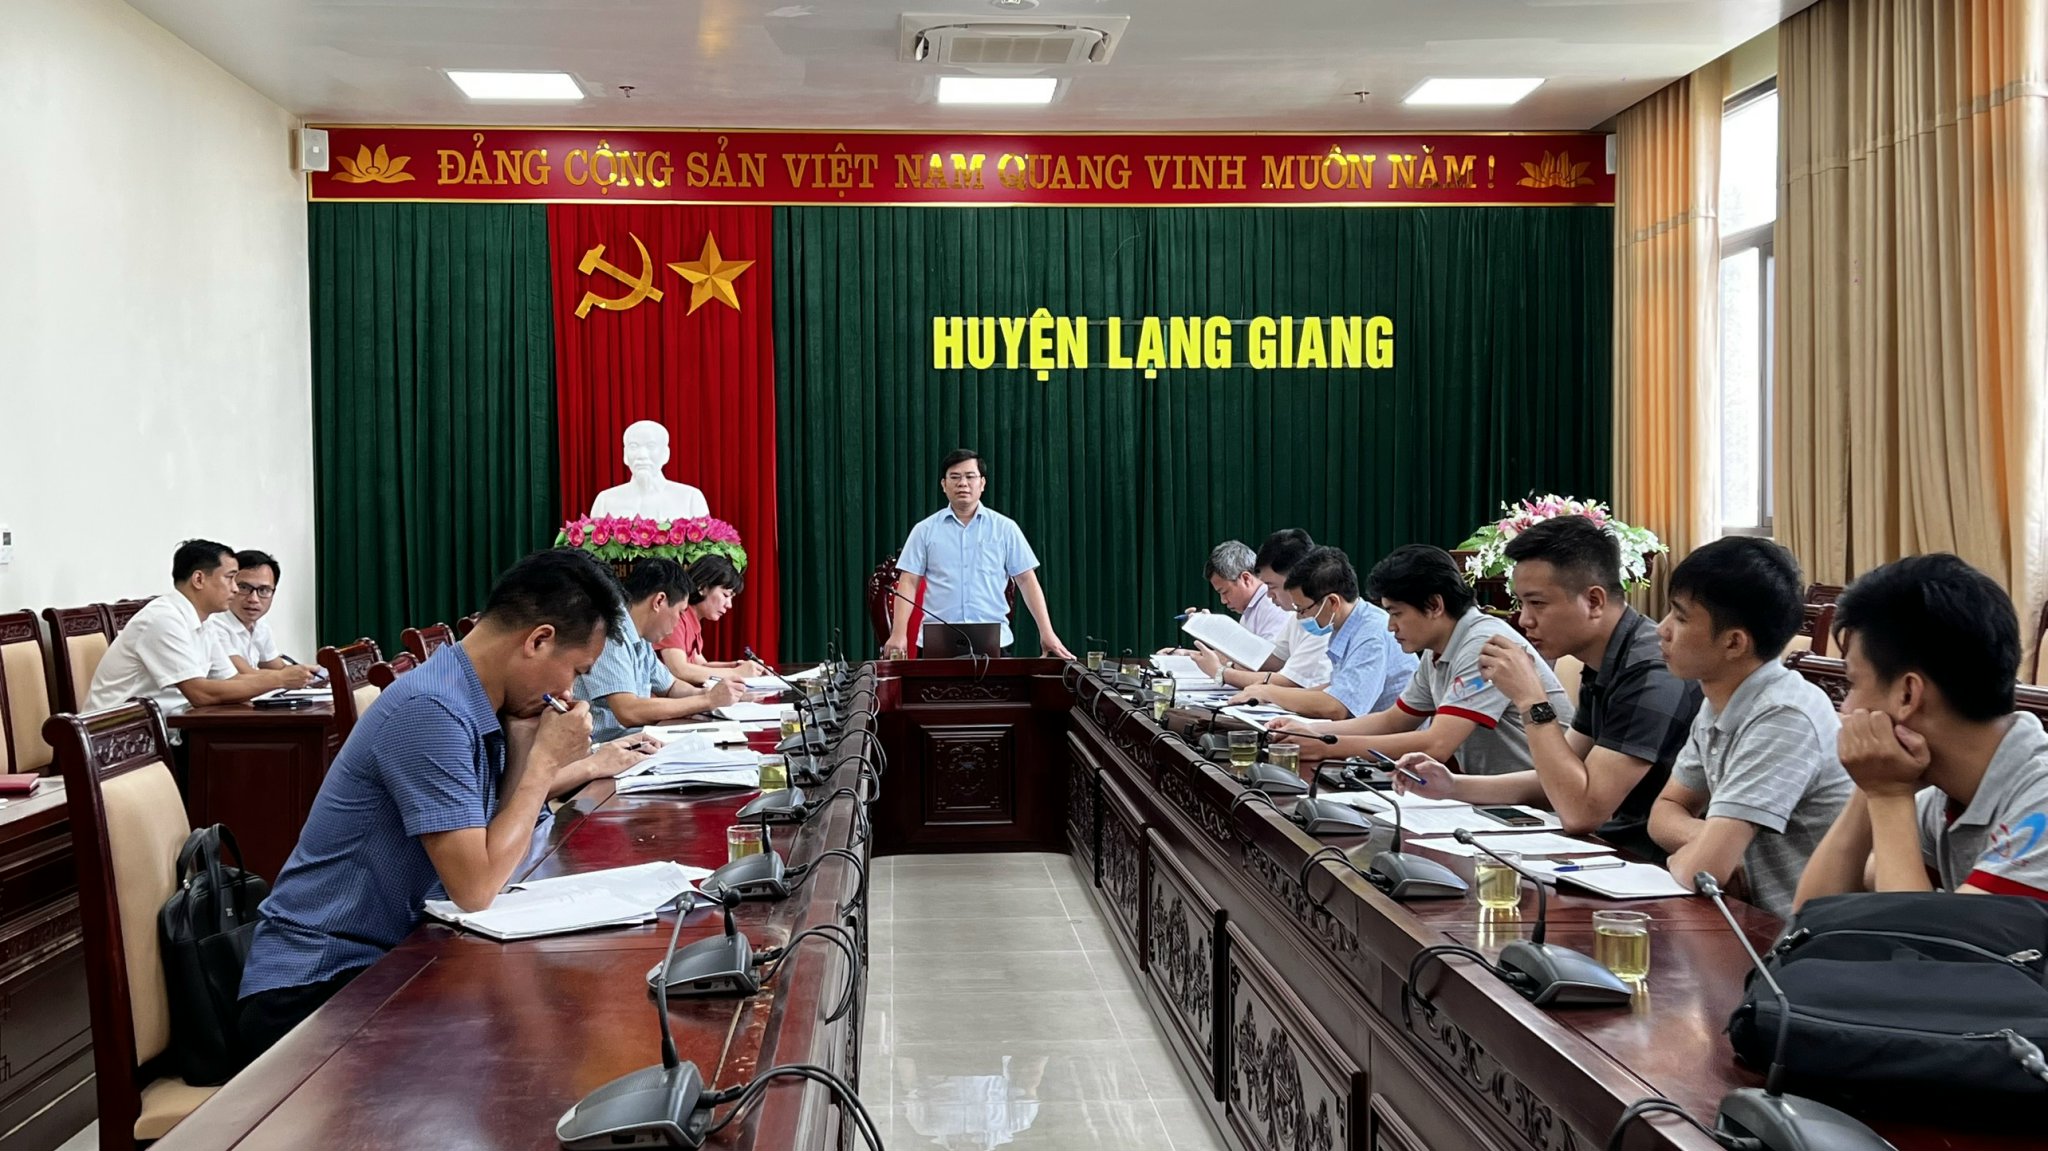 Bac Giang’s VILG Management Board inspects project implementation in the districts|https://stnmt.bacgiang.gov.vn/en_US/detailed-news/-/asset_publisher/u427aQT80iO6/content/bac-giang-s-vilg-management-board-inspects-project-implementation-in-the-districts